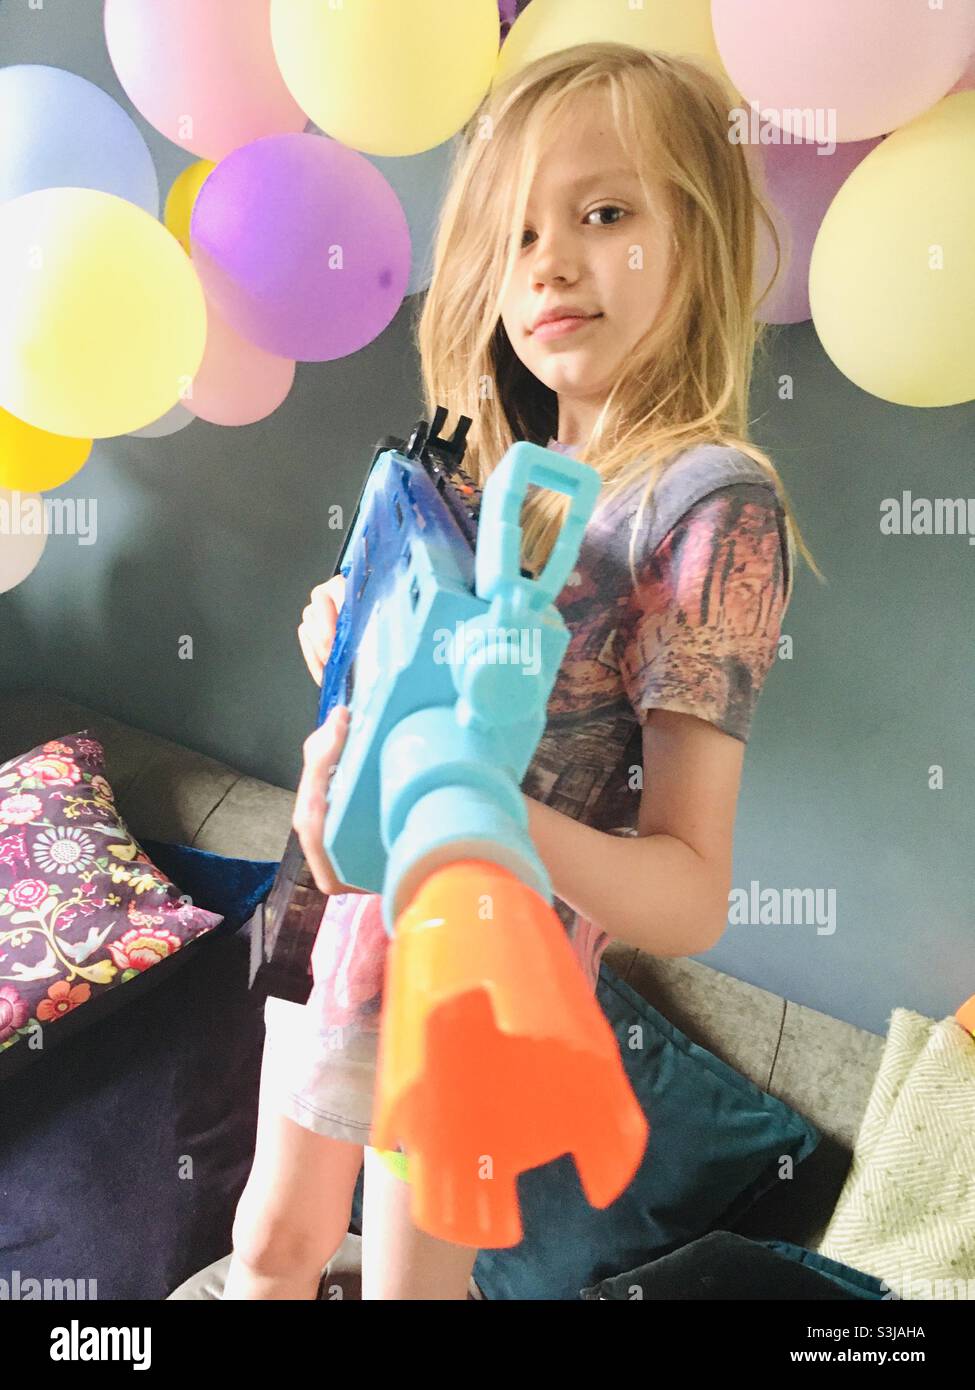 A young boy during his birthday party with a nerf gun and colourful balloons. Stock Photo